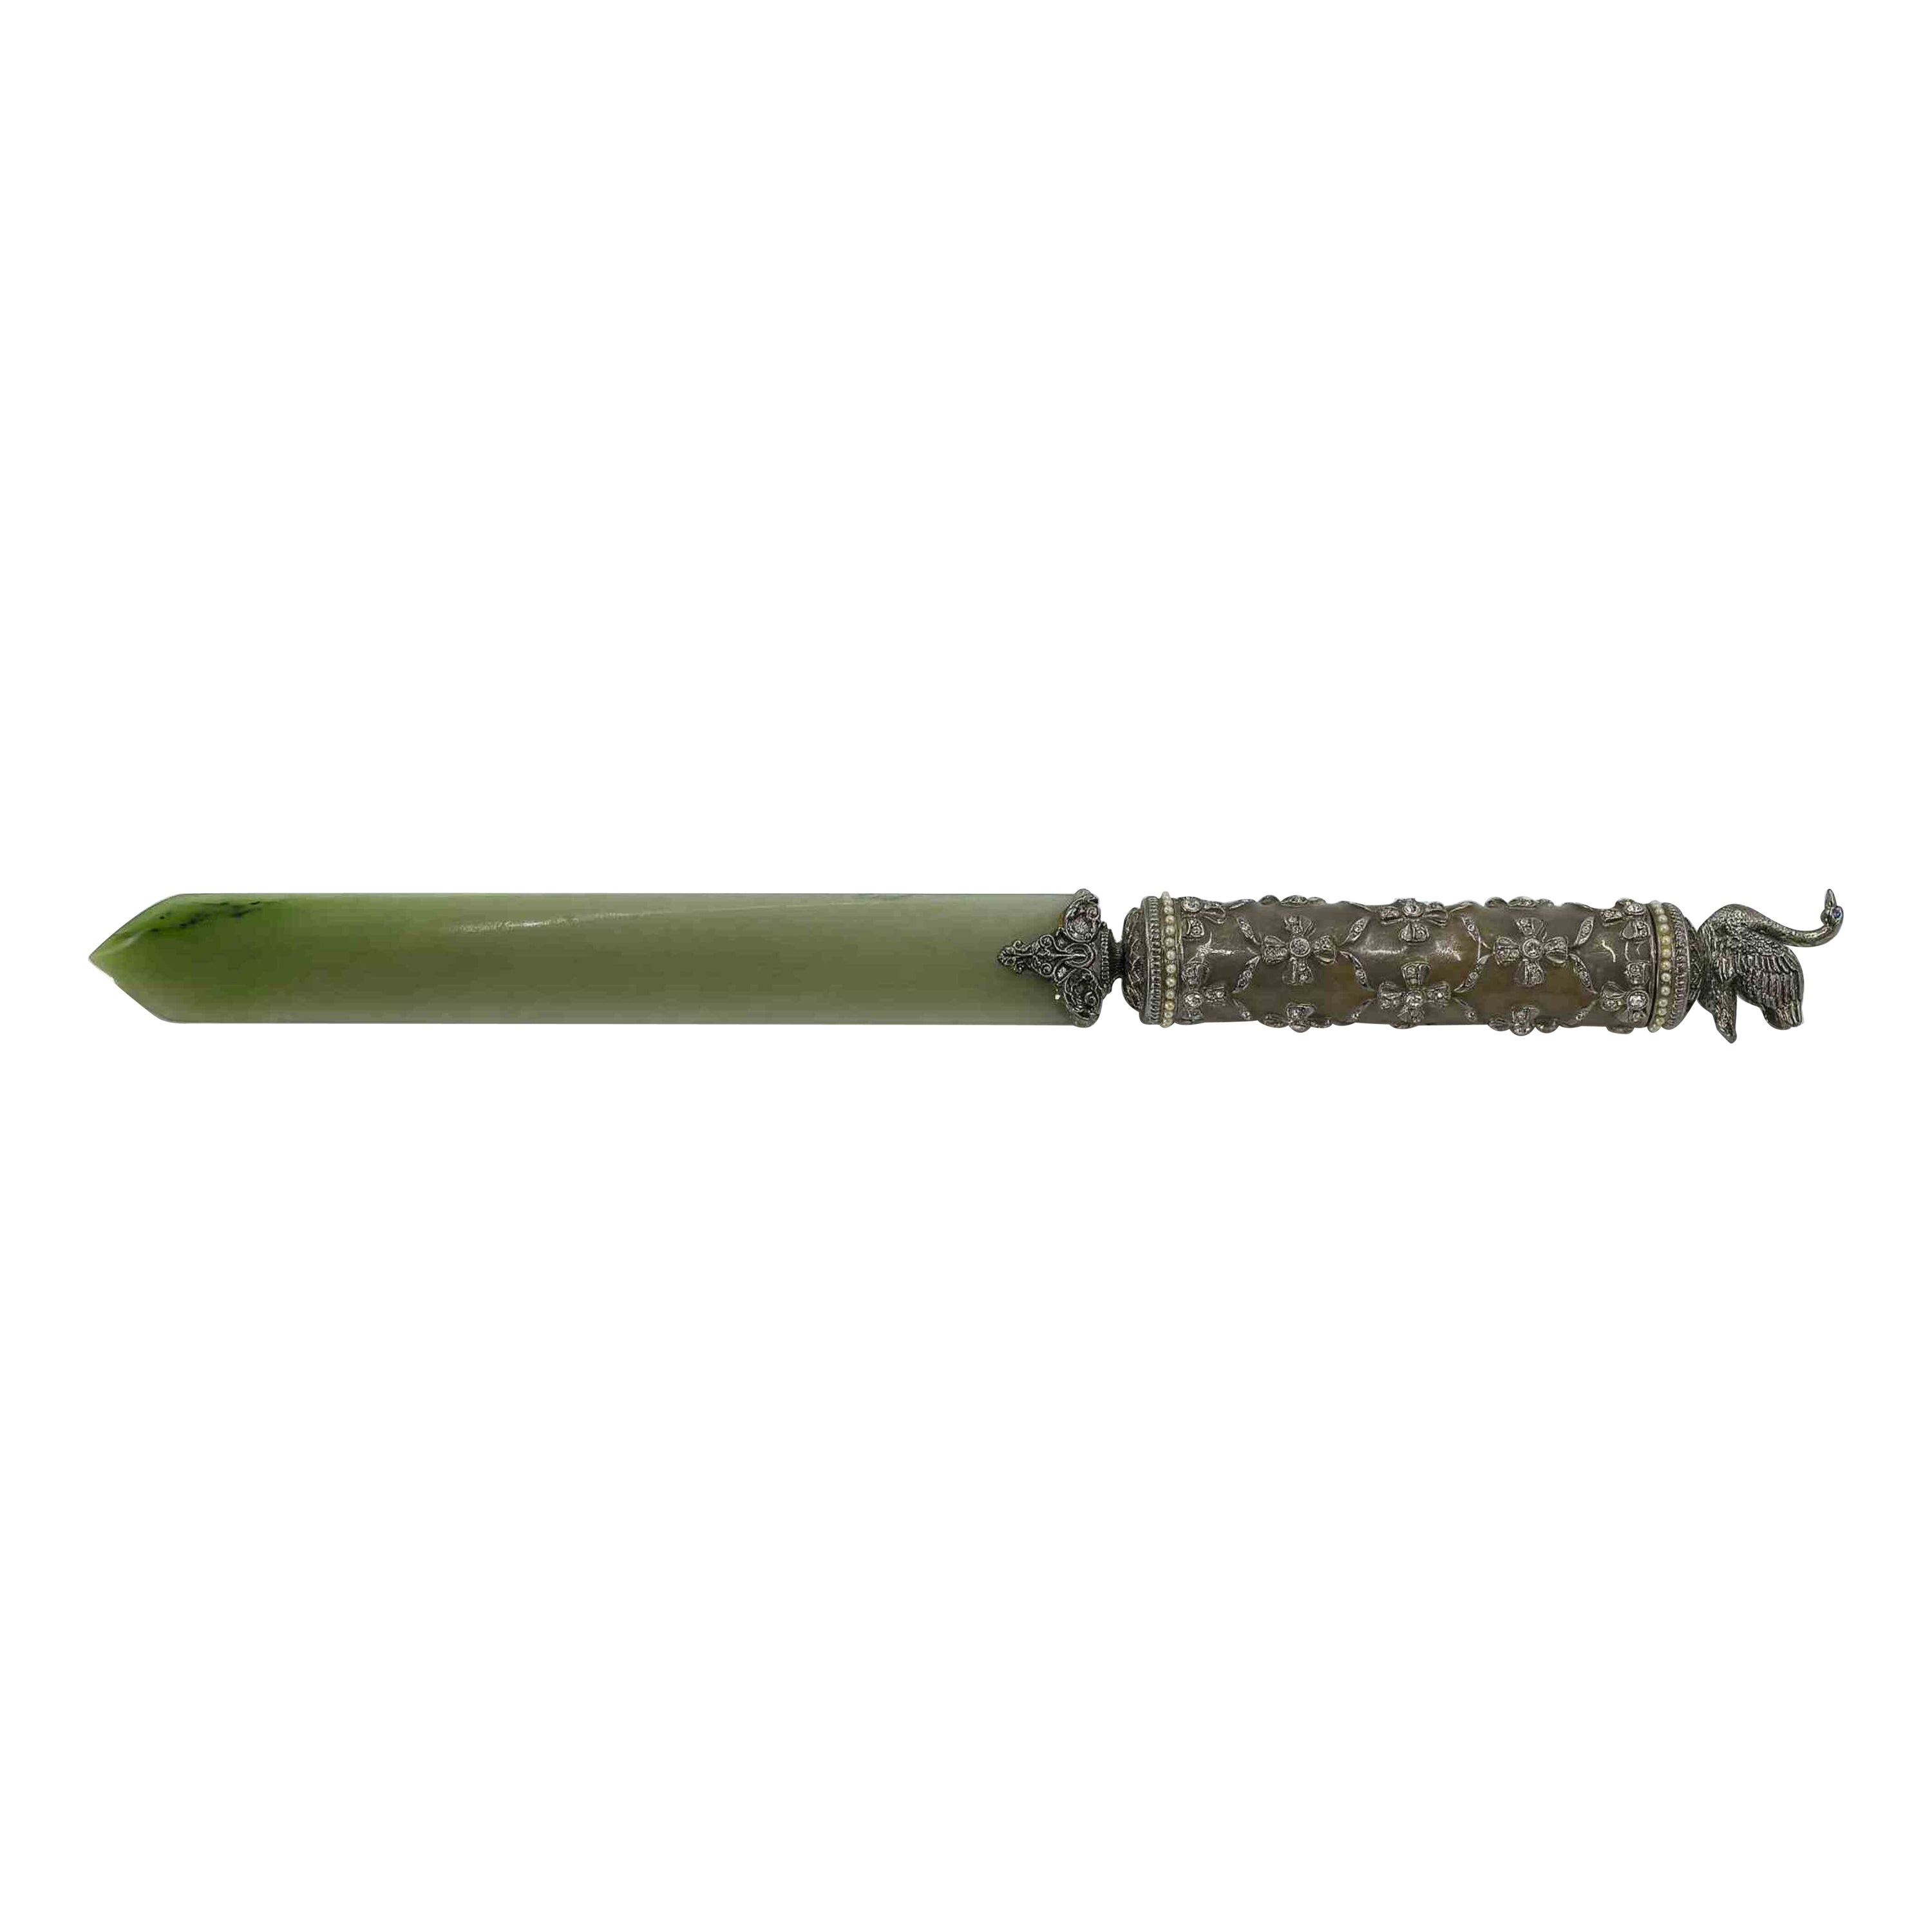 Paper Knife by Fabergè, Early 20th Century